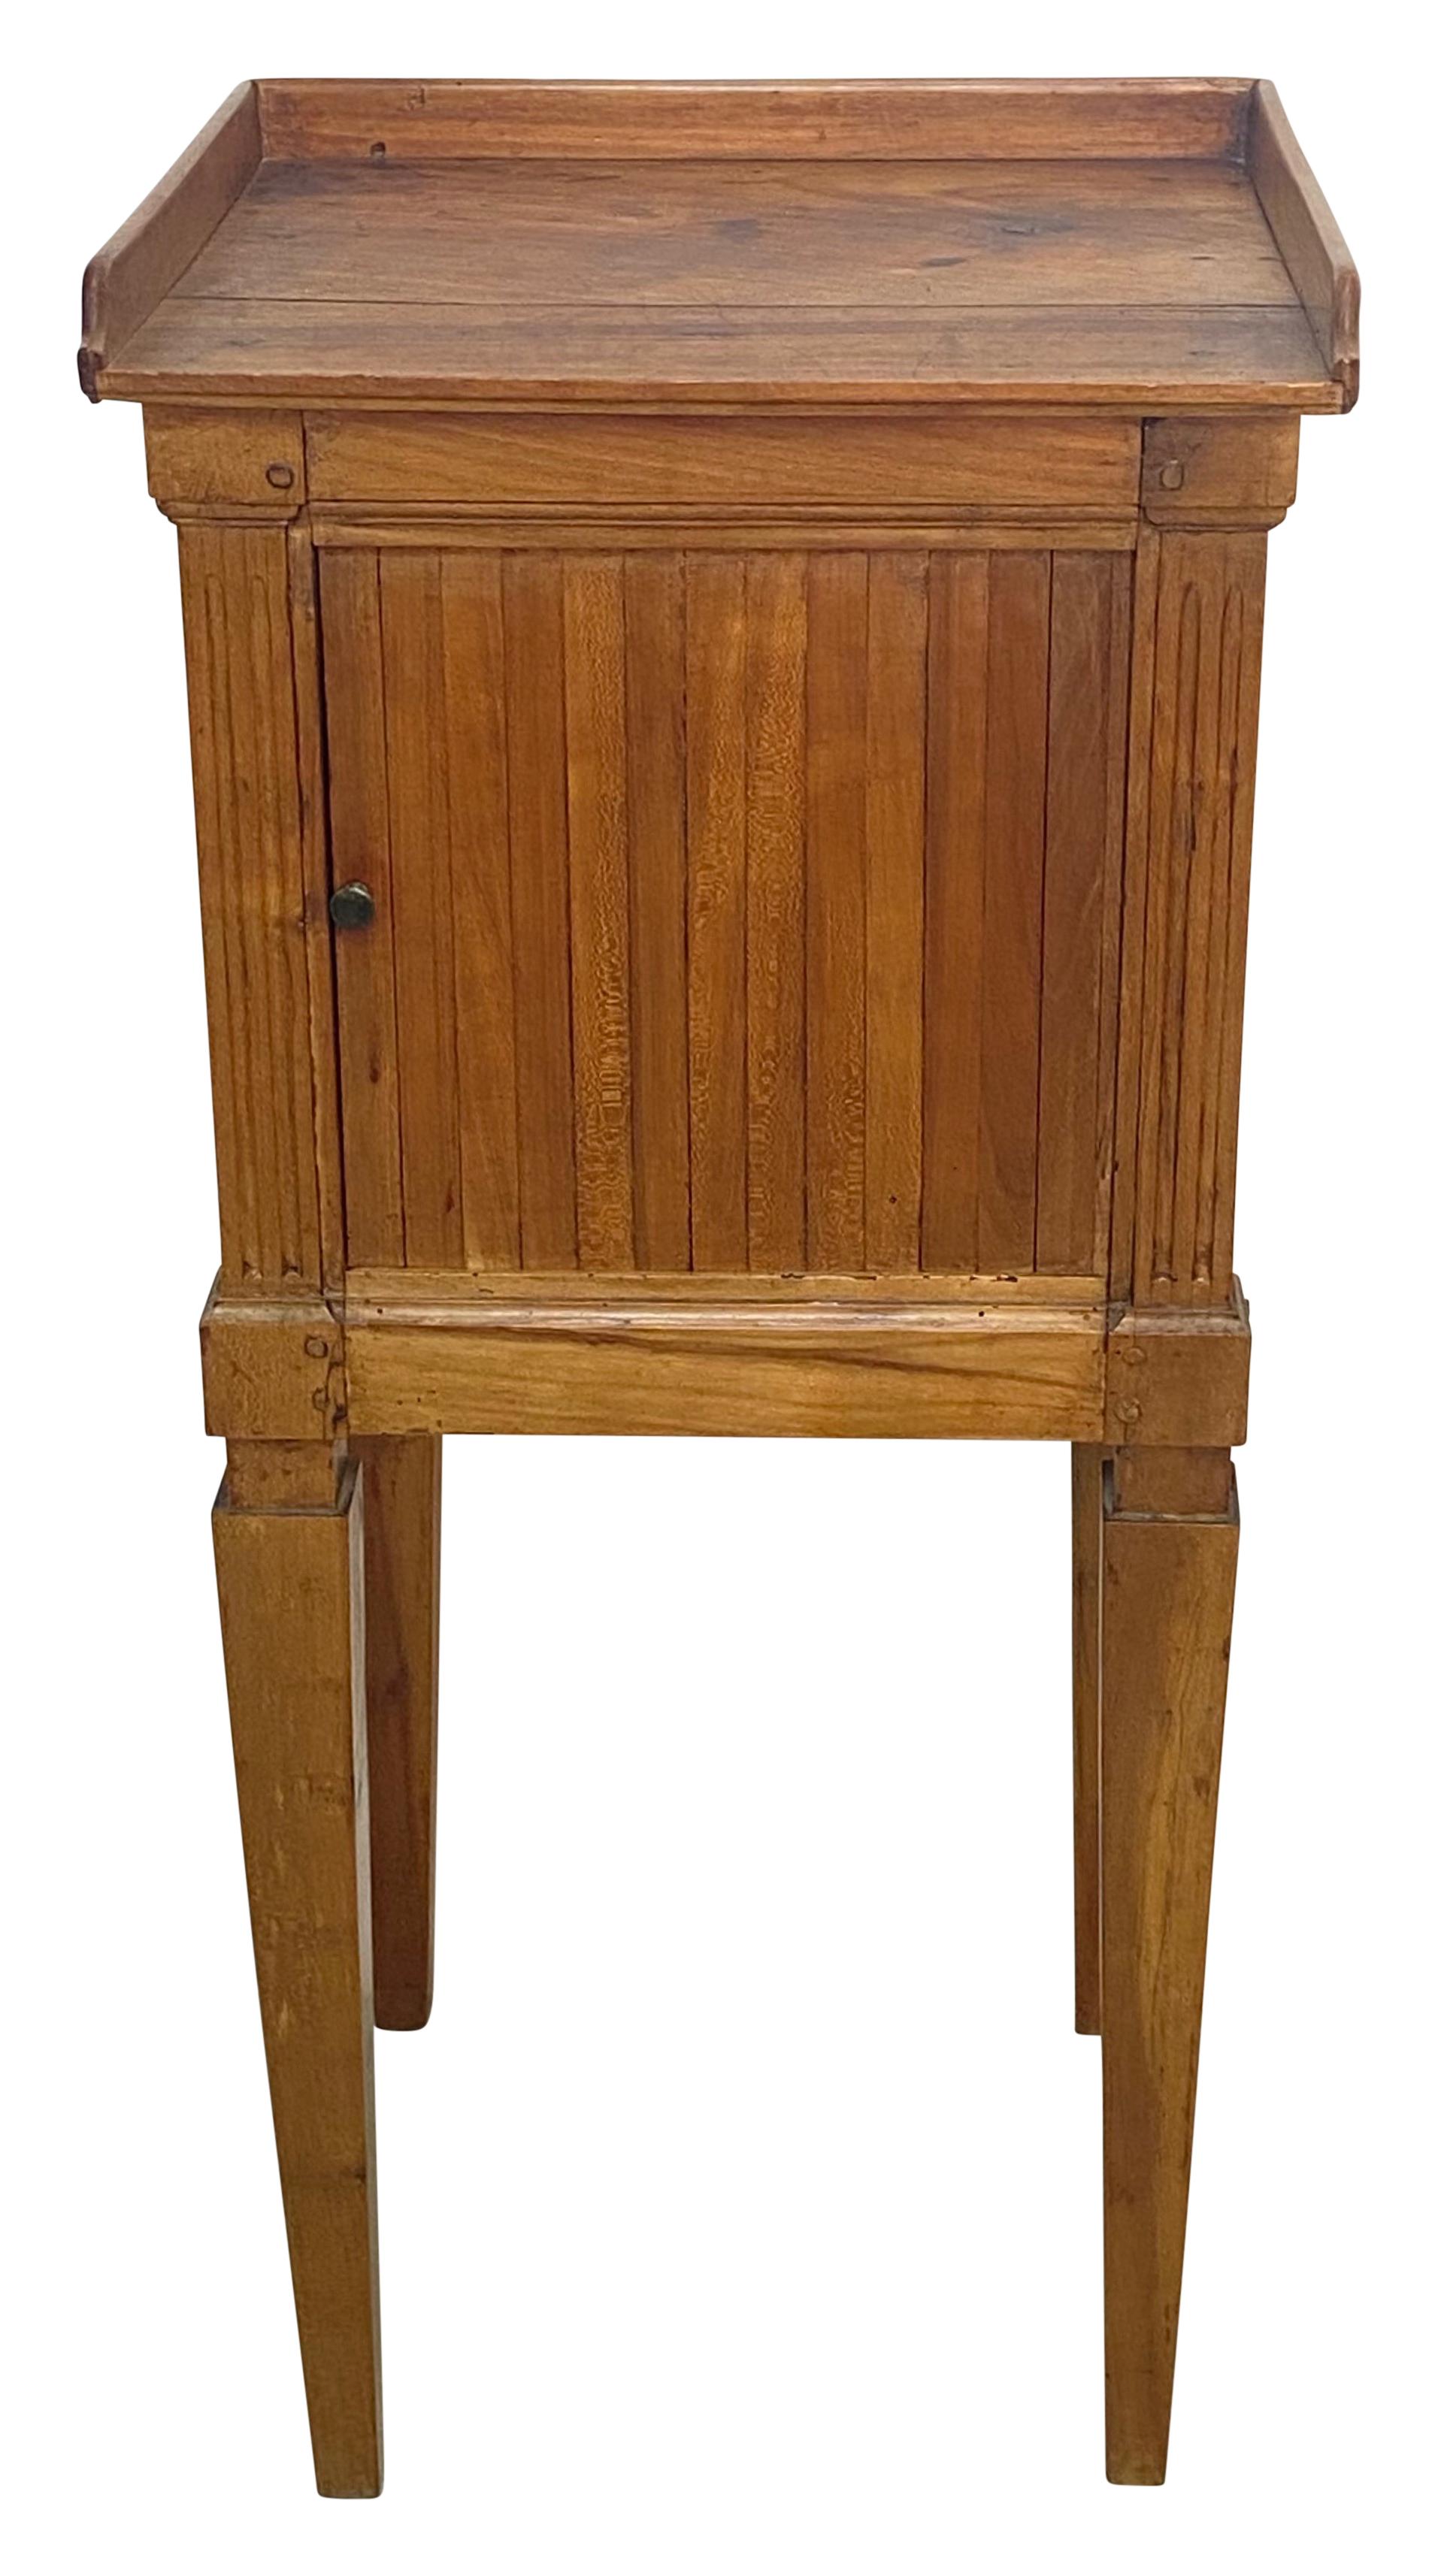 An attractive solid cherrywood bedside table cabinet with tambour sliding front door and standing on tapering square legs. The tambour door slides very smoothly.
French, late 18th century circa 1780.
In remarkable original antique condition. Sturdy,